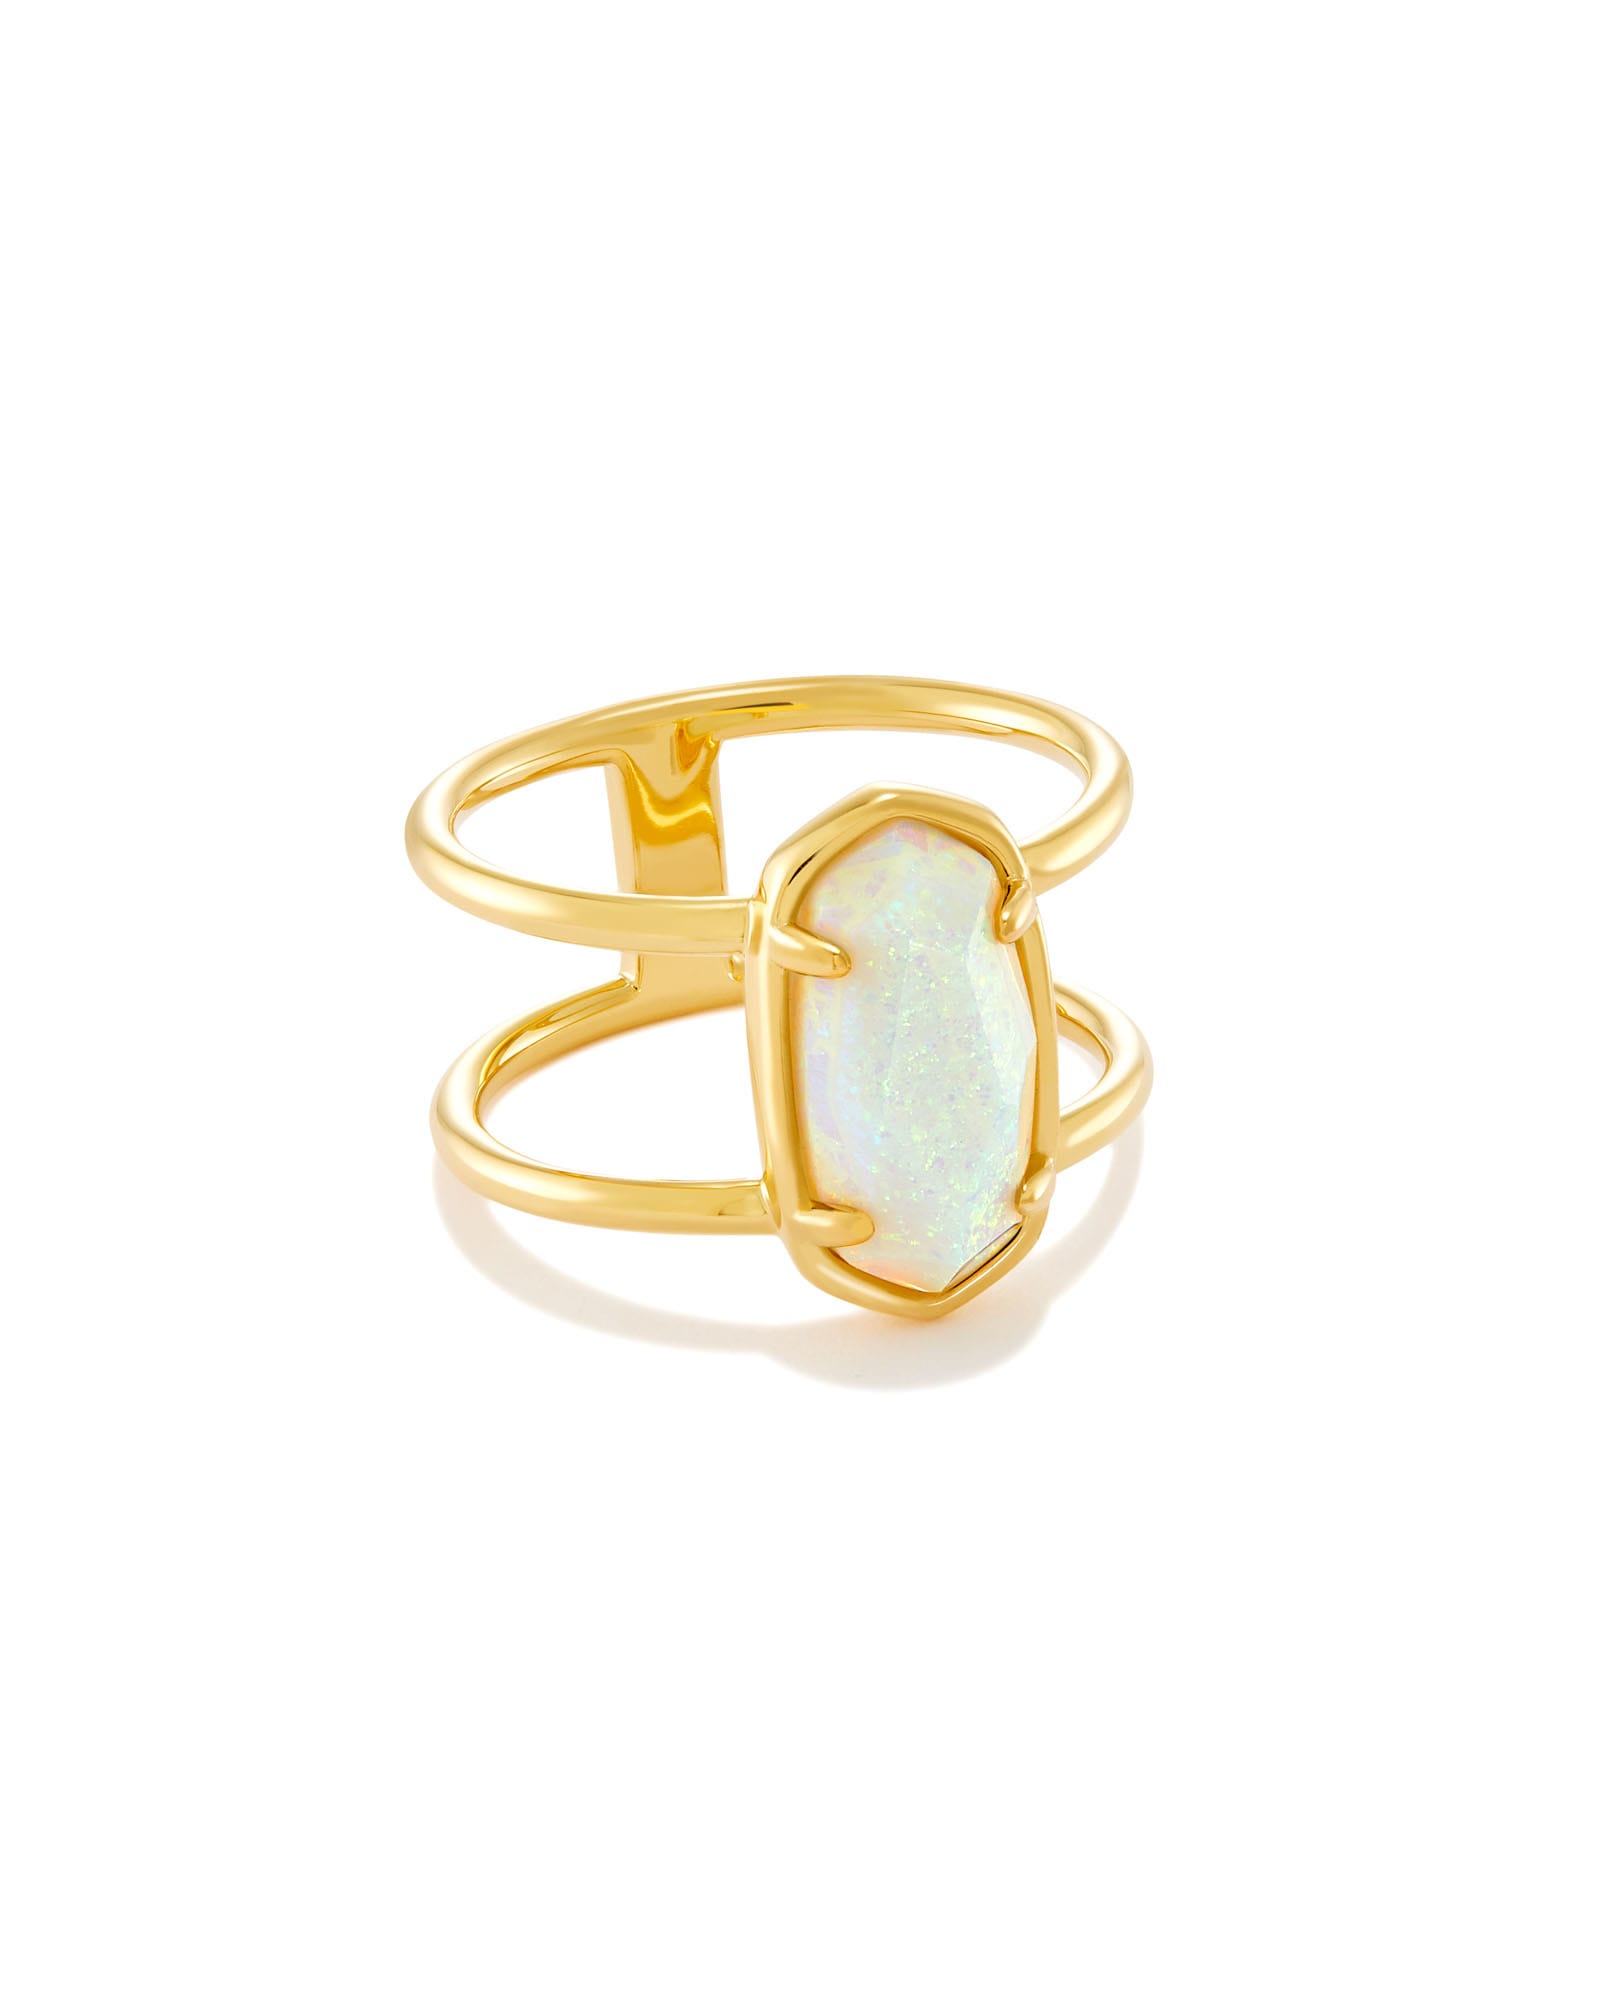 Kendra Scott Elyse 18k Gold Vermeil Double Band Ring in White Sterling Opal | Princess Mia Sterling Opal